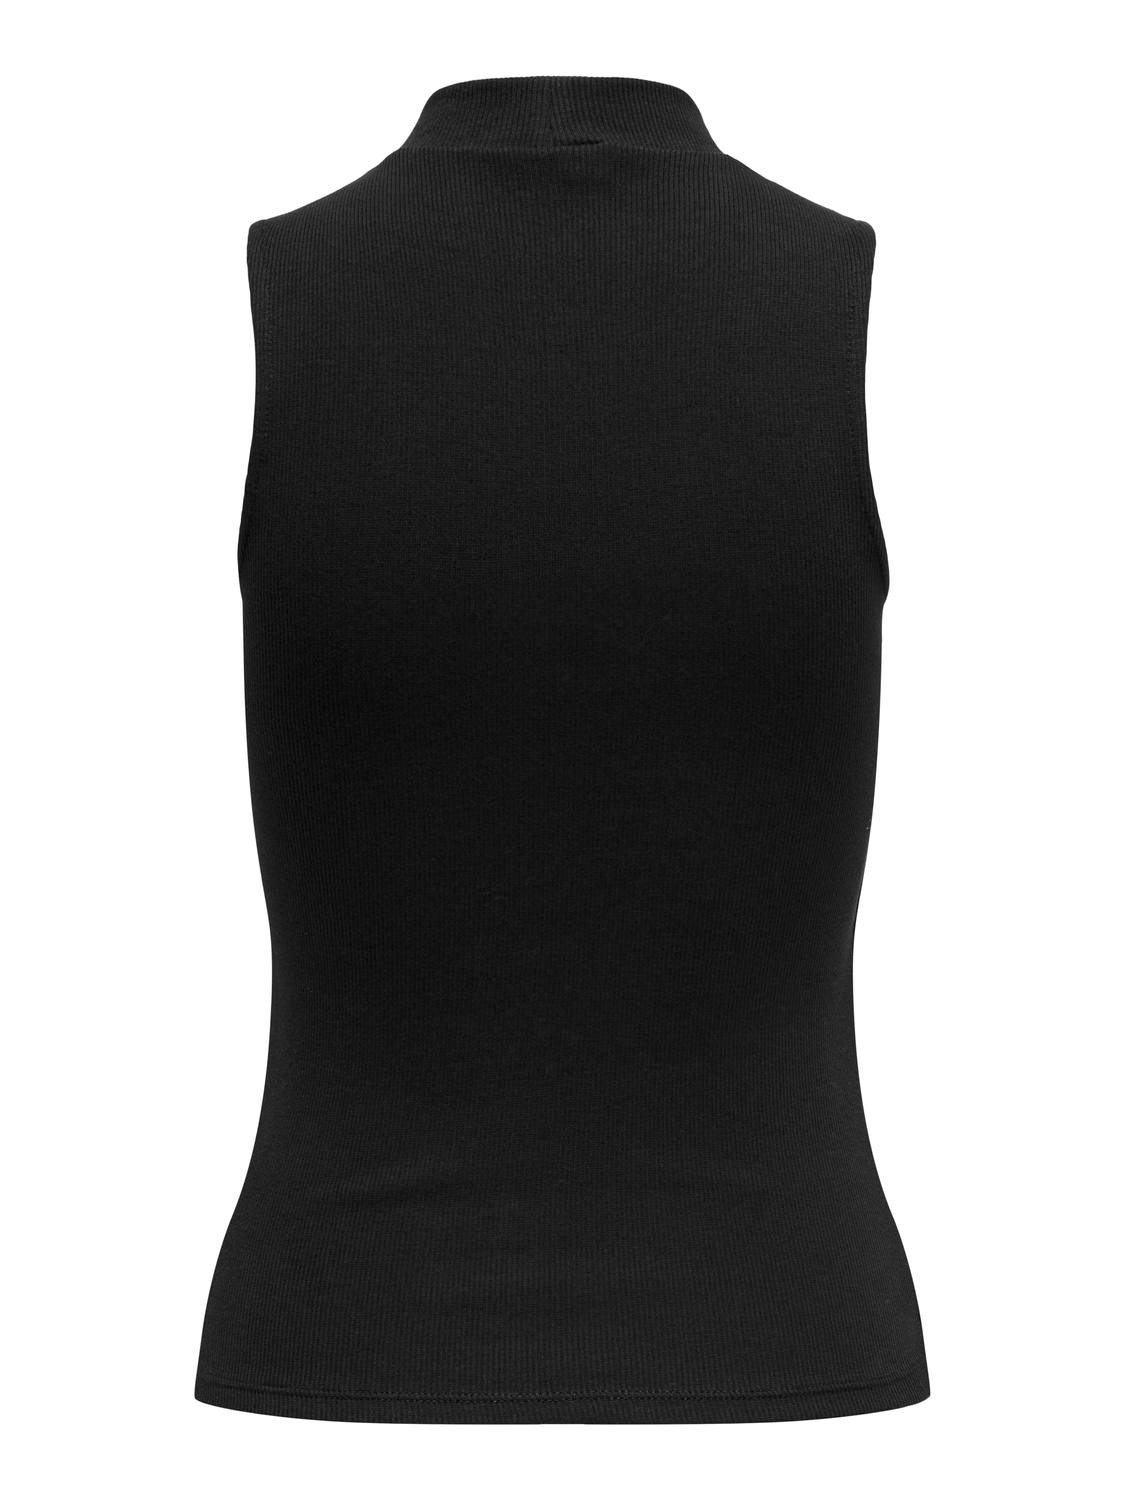 ONLY Col montant Top -Black - 15227000